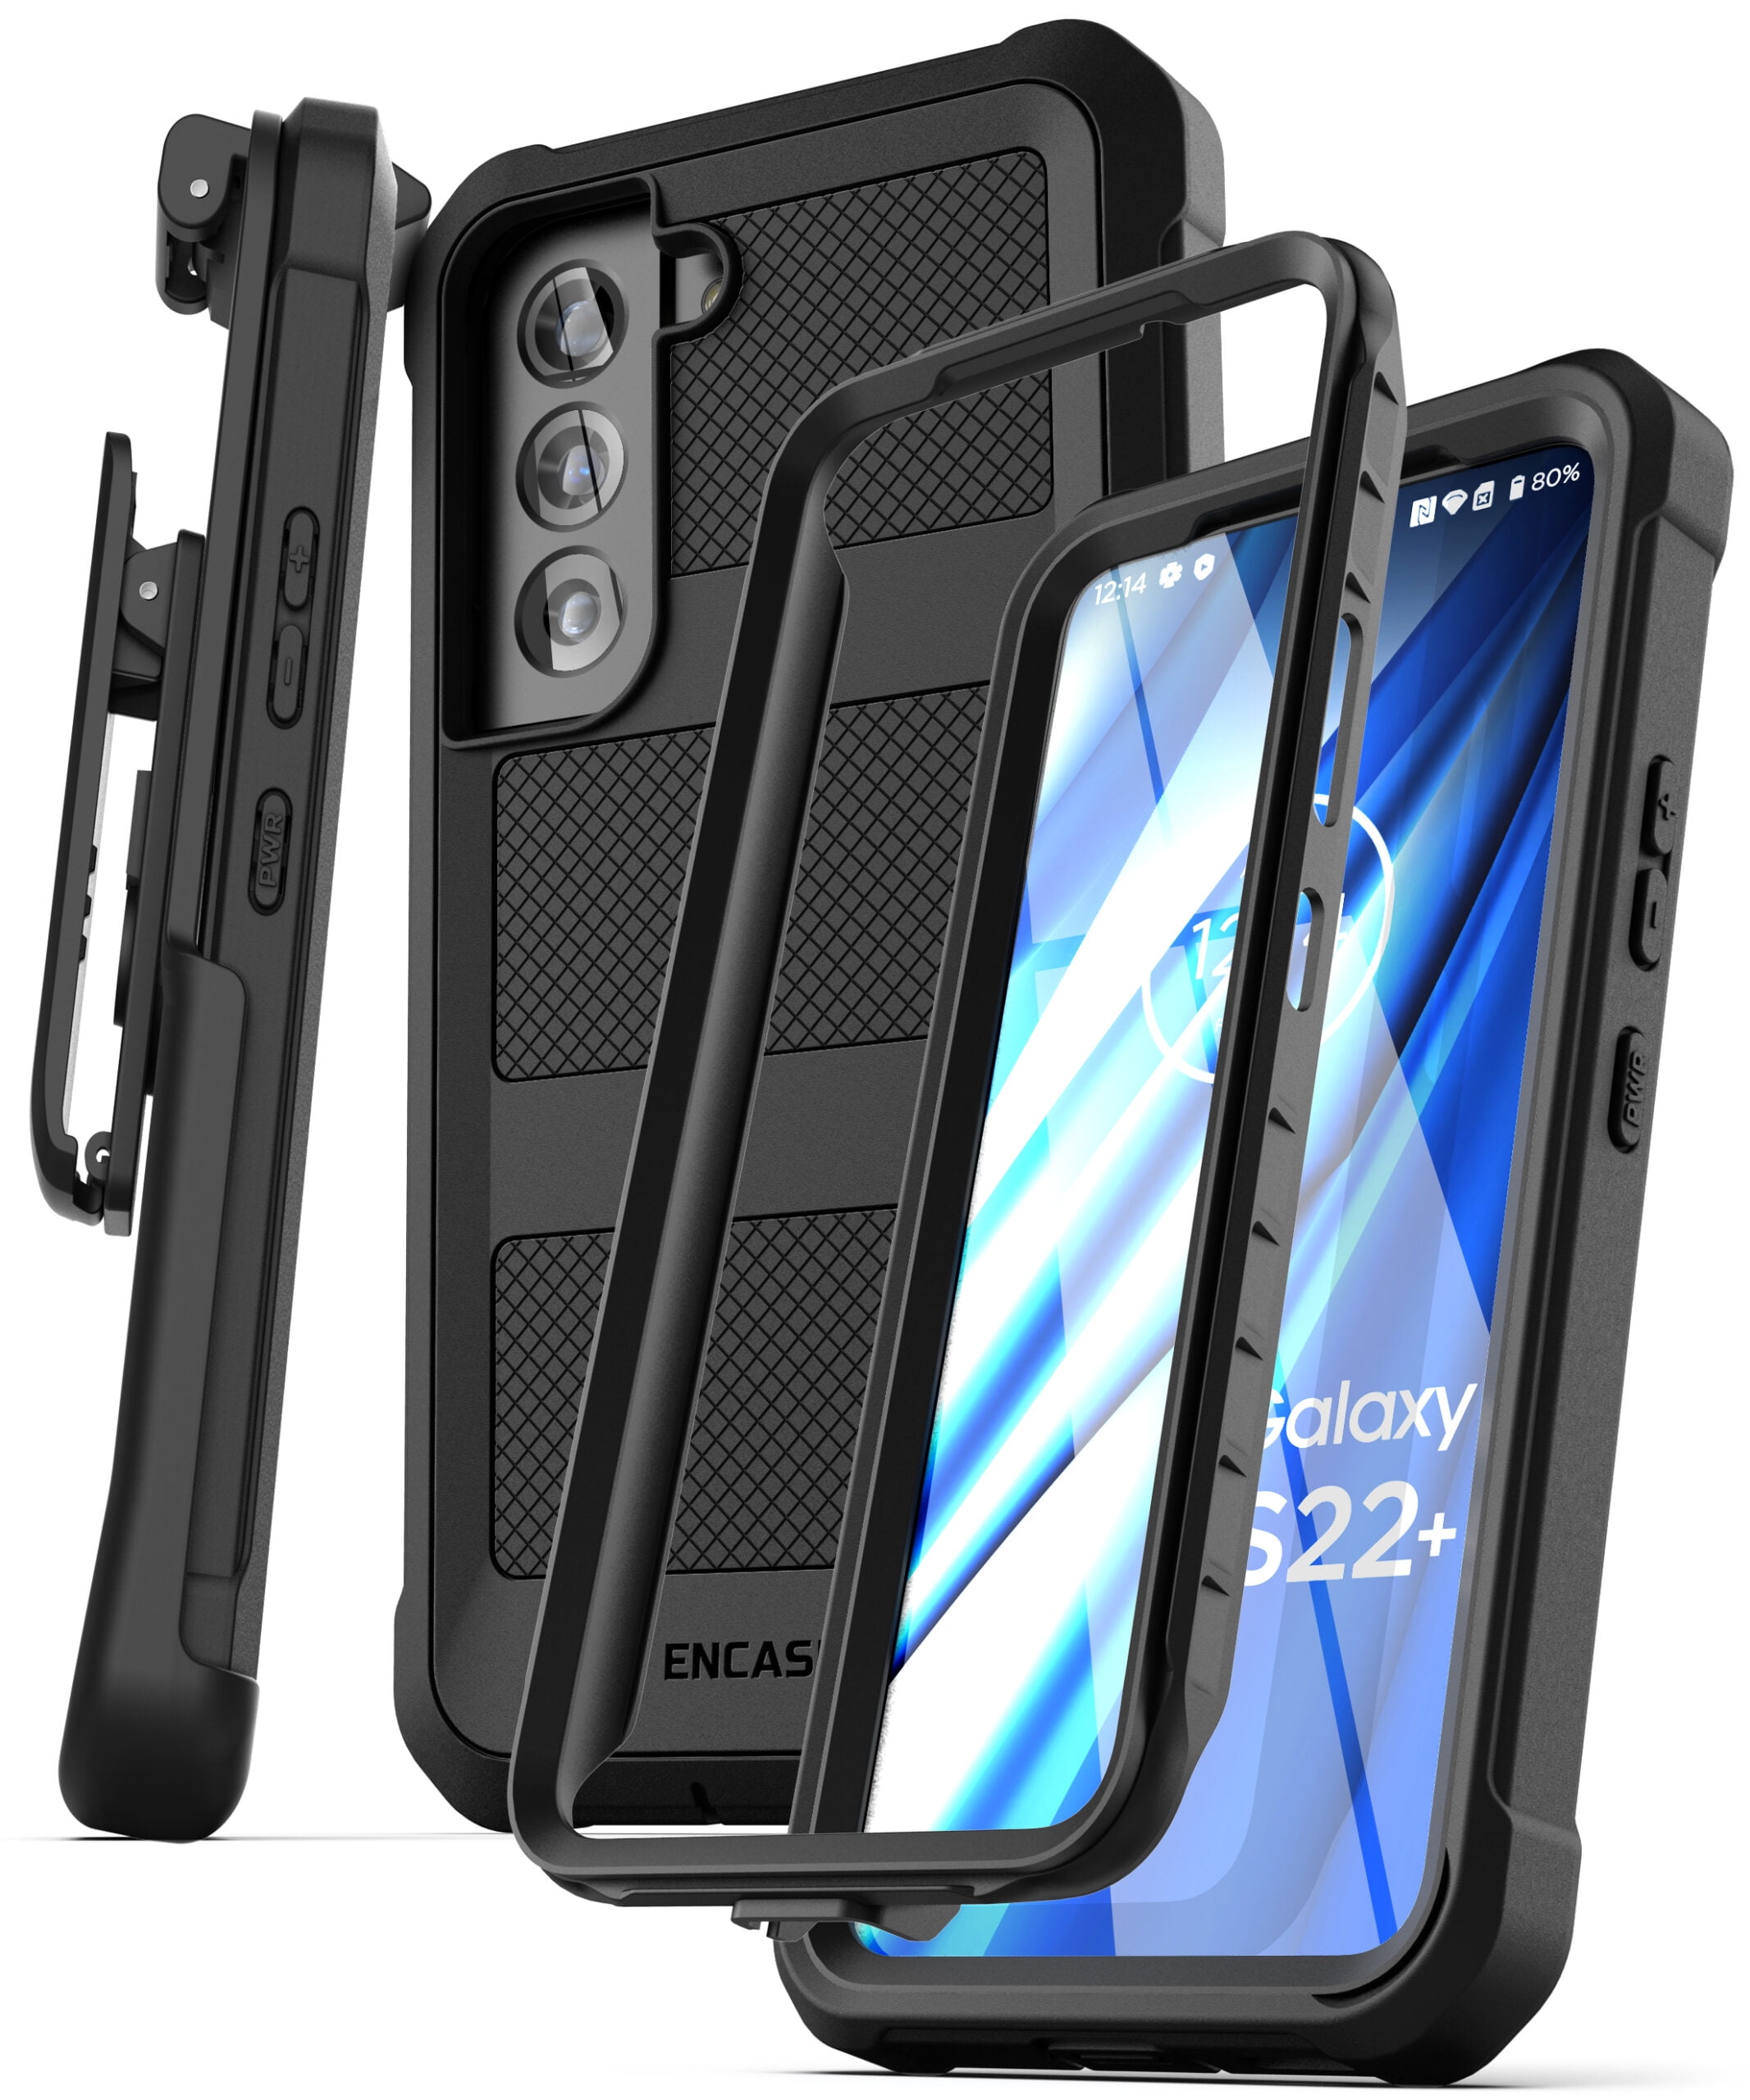 Samsung GALAXY S20 FE Case, With [Tempered Glass Screen Protector  Included], STARSHOP Drop Protection Ring Kickstand Cover- Ink Blue